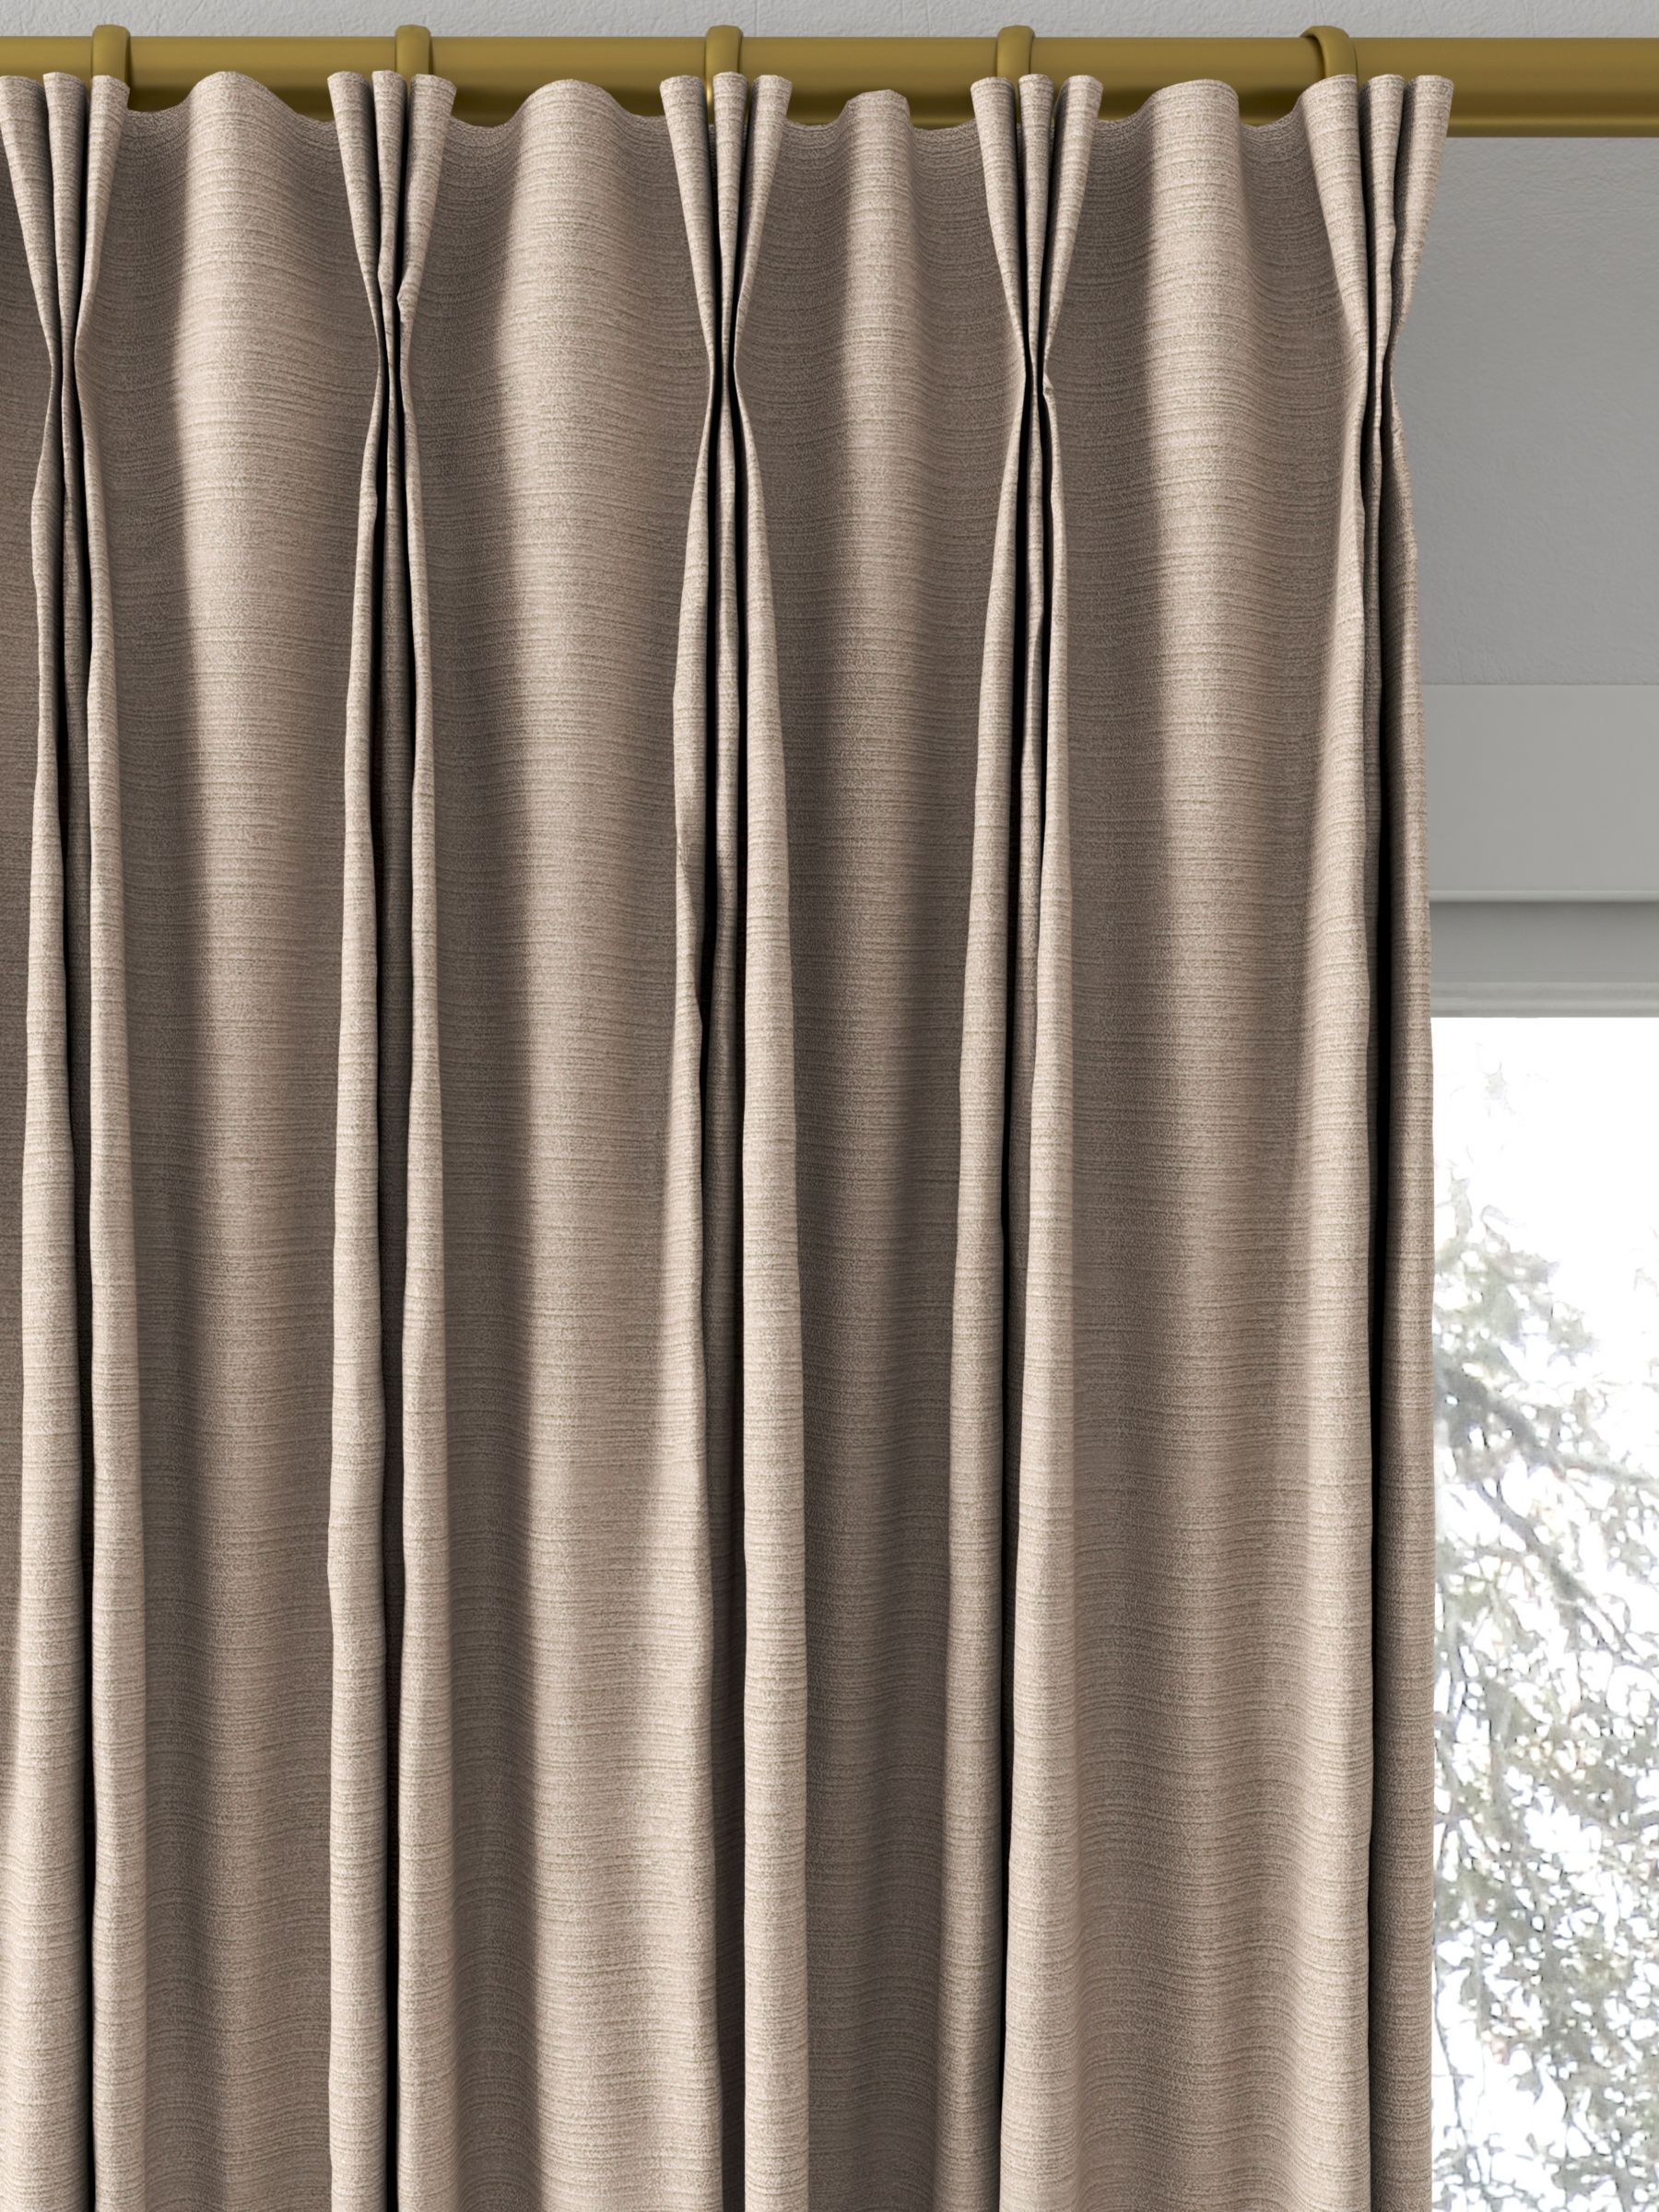 Designers Guild Pampas Made to Measure Curtains, Biscuit